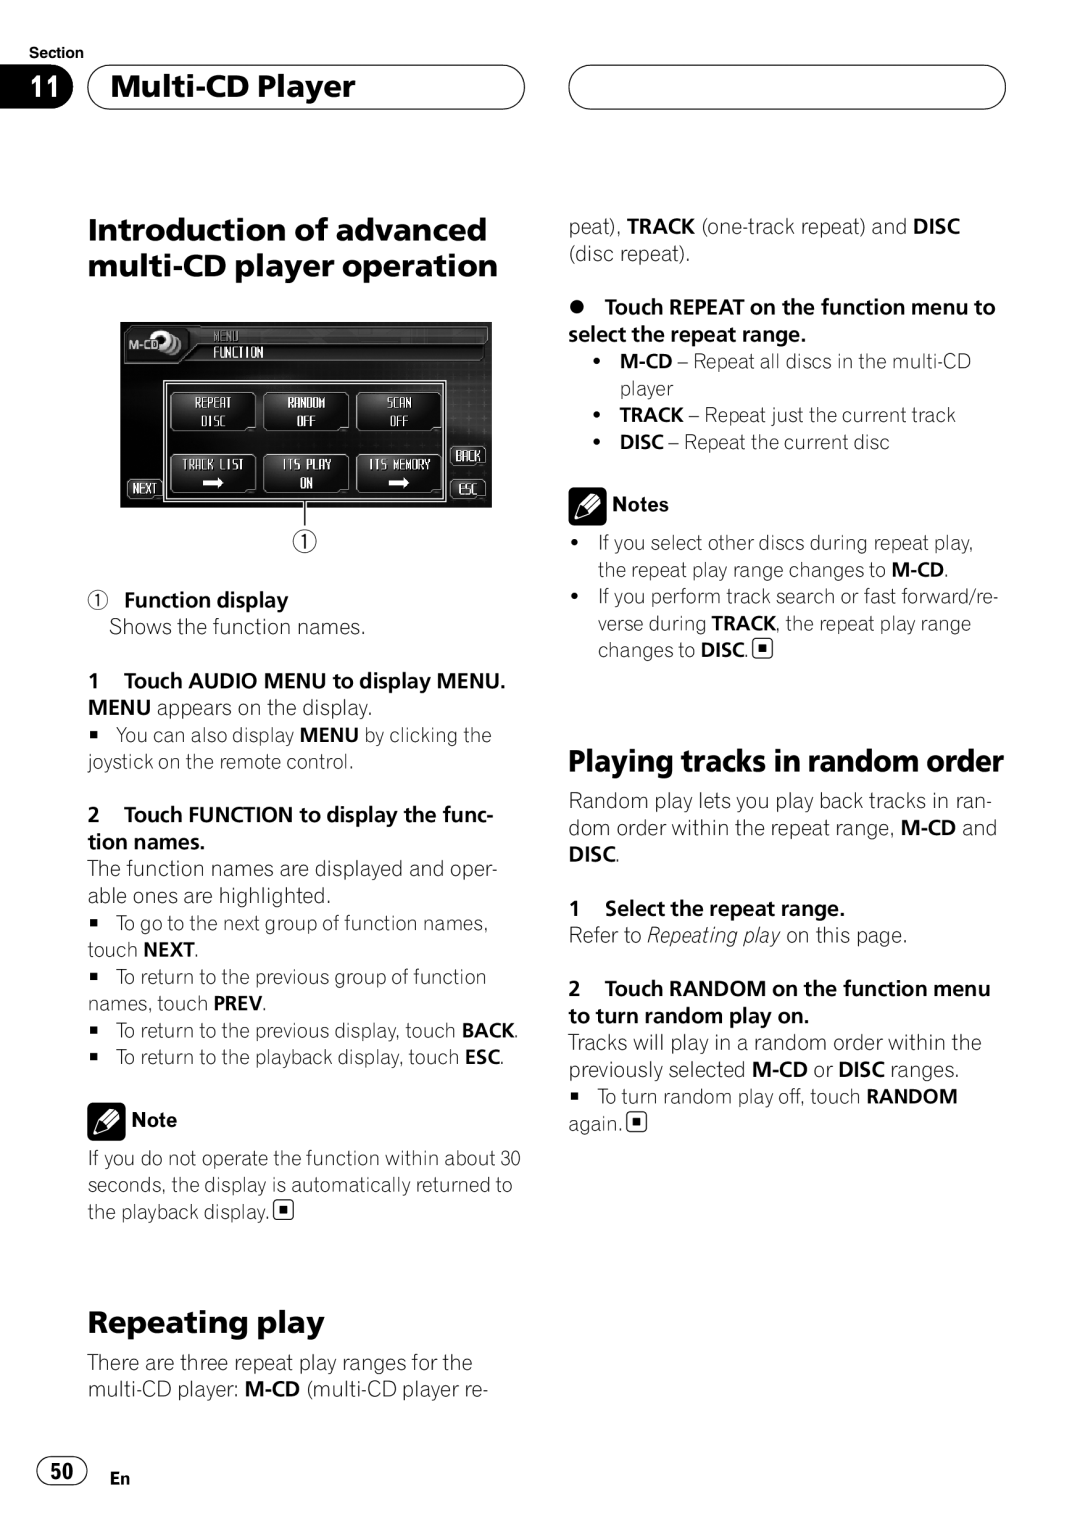 Pioneer AVH-P6800DVD operation manual Multi-CDPlayer, Introduction of advanced multi-CDplayer operation, Repeating play 